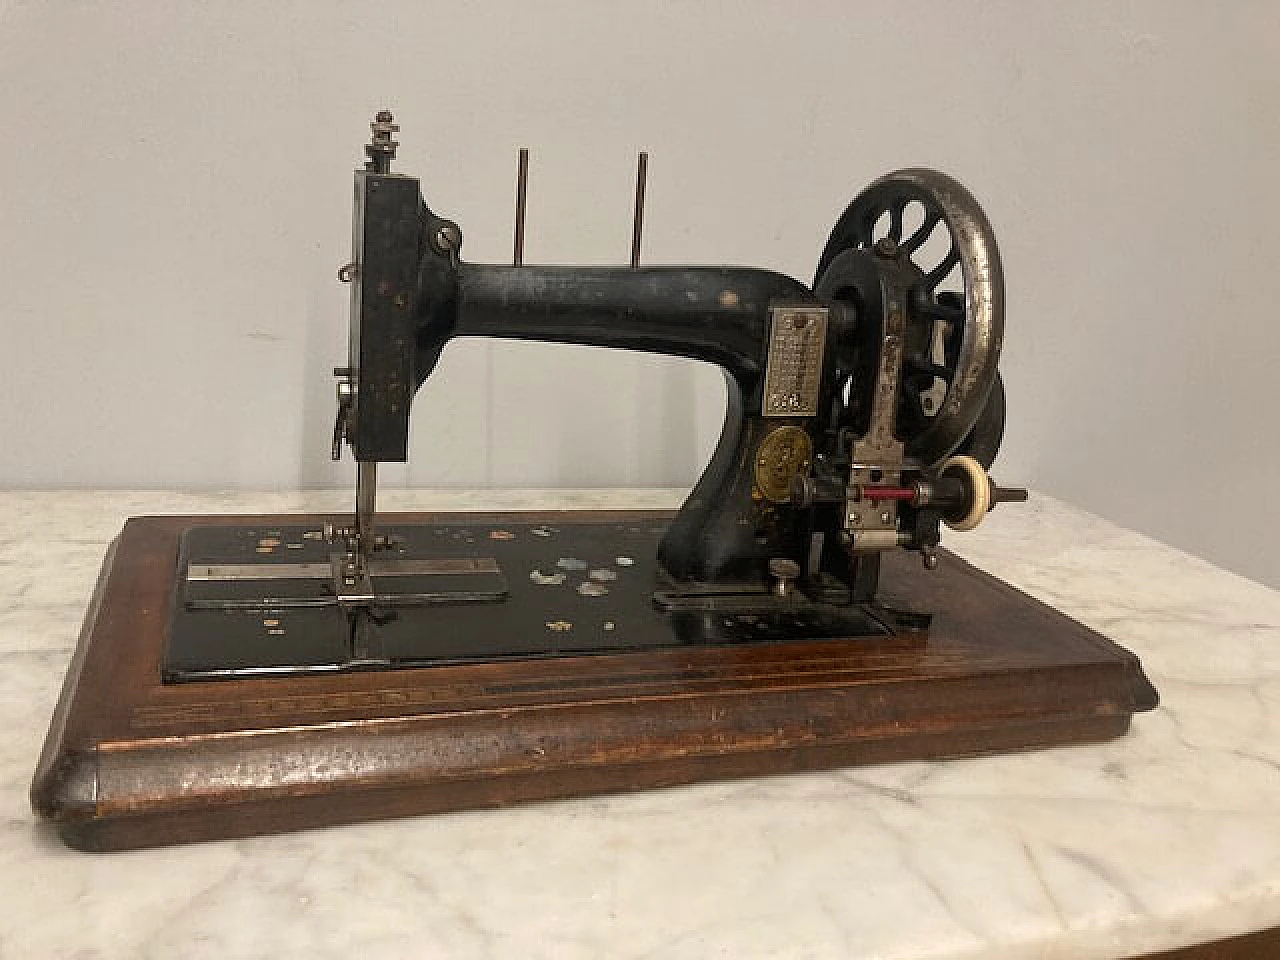 Tabletop sewing machine with mother-of-pearl inlays, late 19th century 9